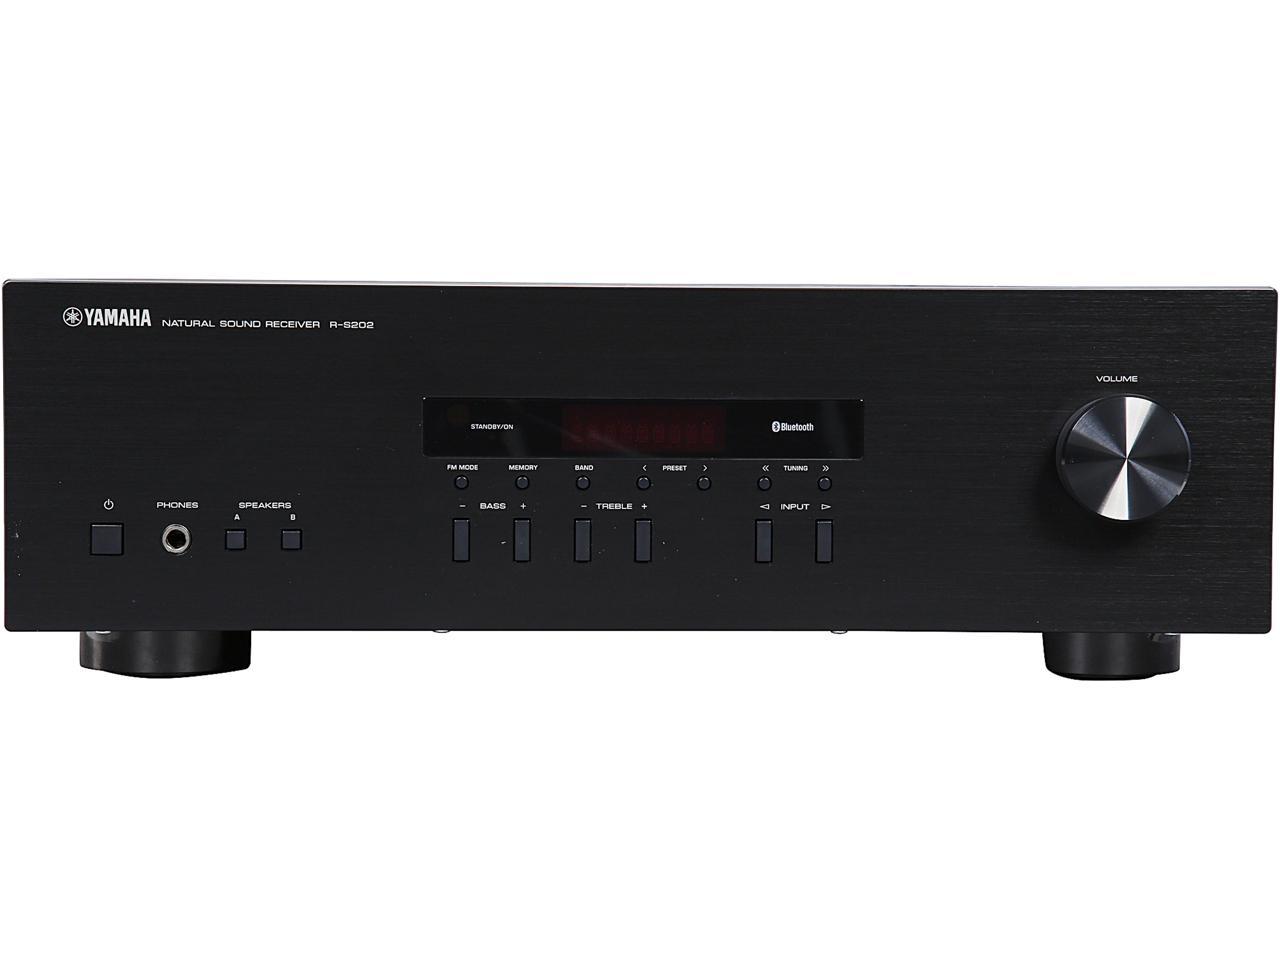 Yamaha R-S202 Stereo Receiver  + $75 Newegg Gift Card $200 + Free Shipping